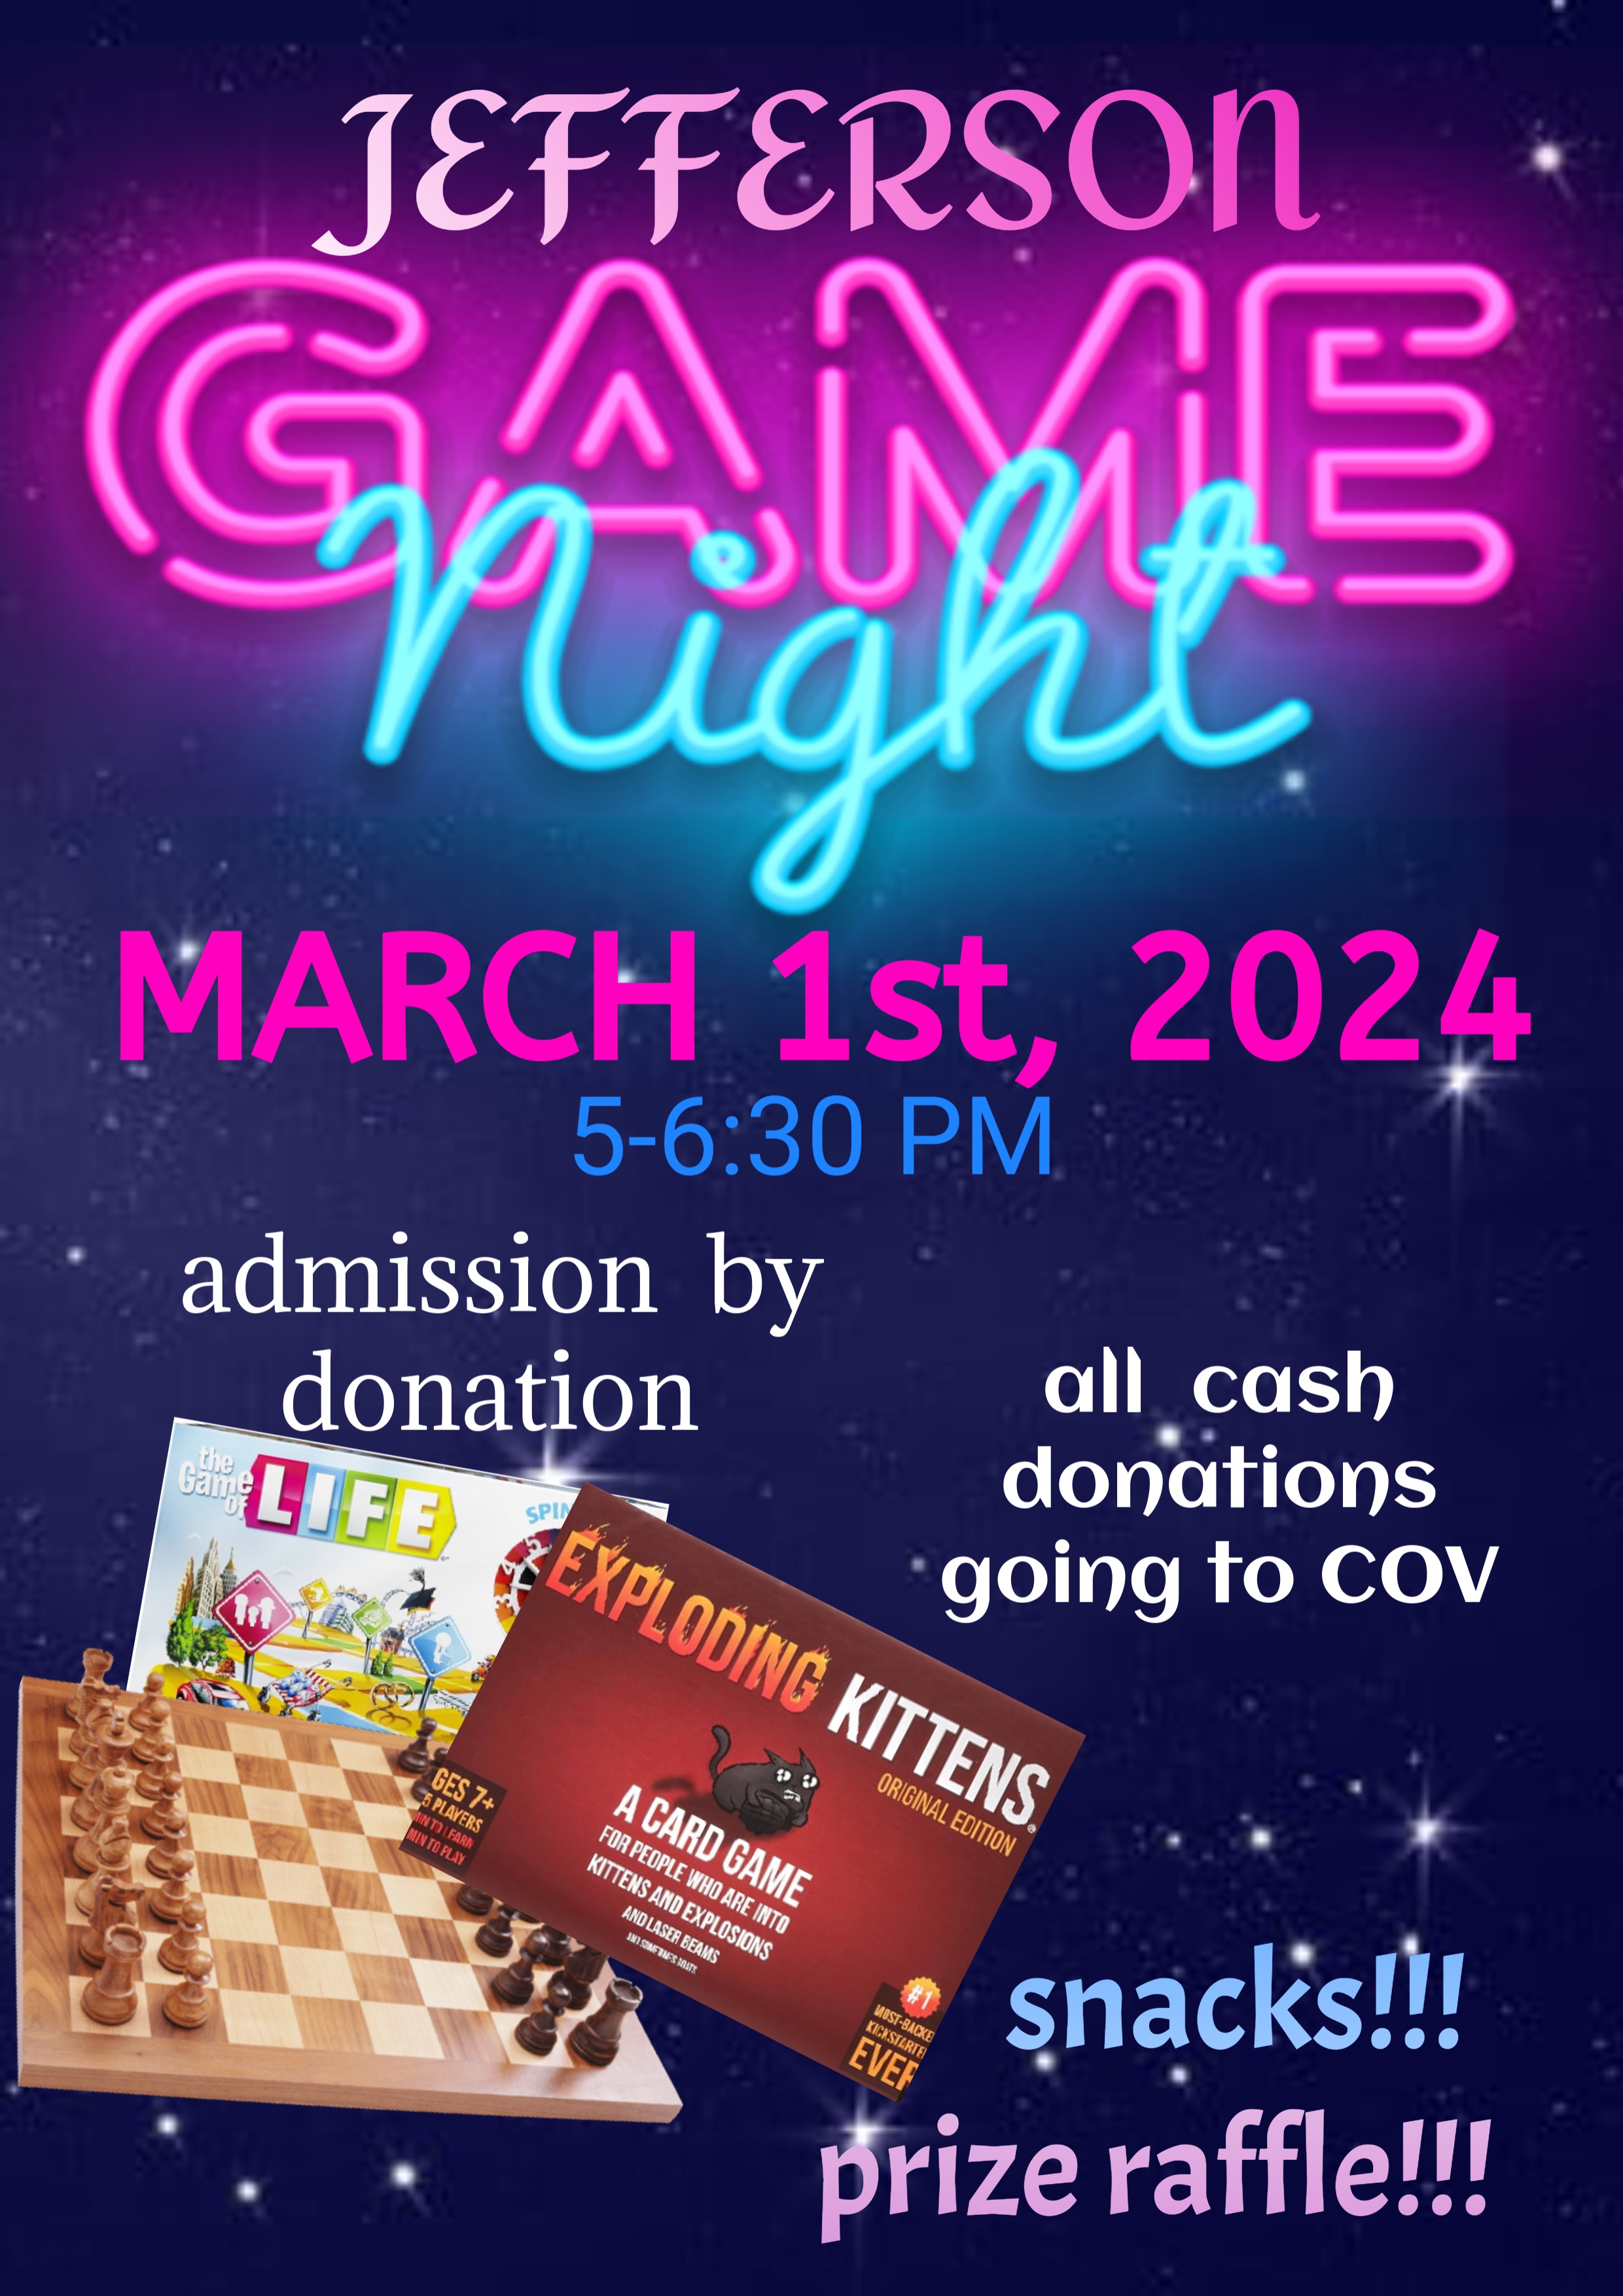 Flyer for Jefferson Game Night on Friday, March 1st, 5:00pm to 6:30pm.  Admission by donation and all cash will be going to COV.